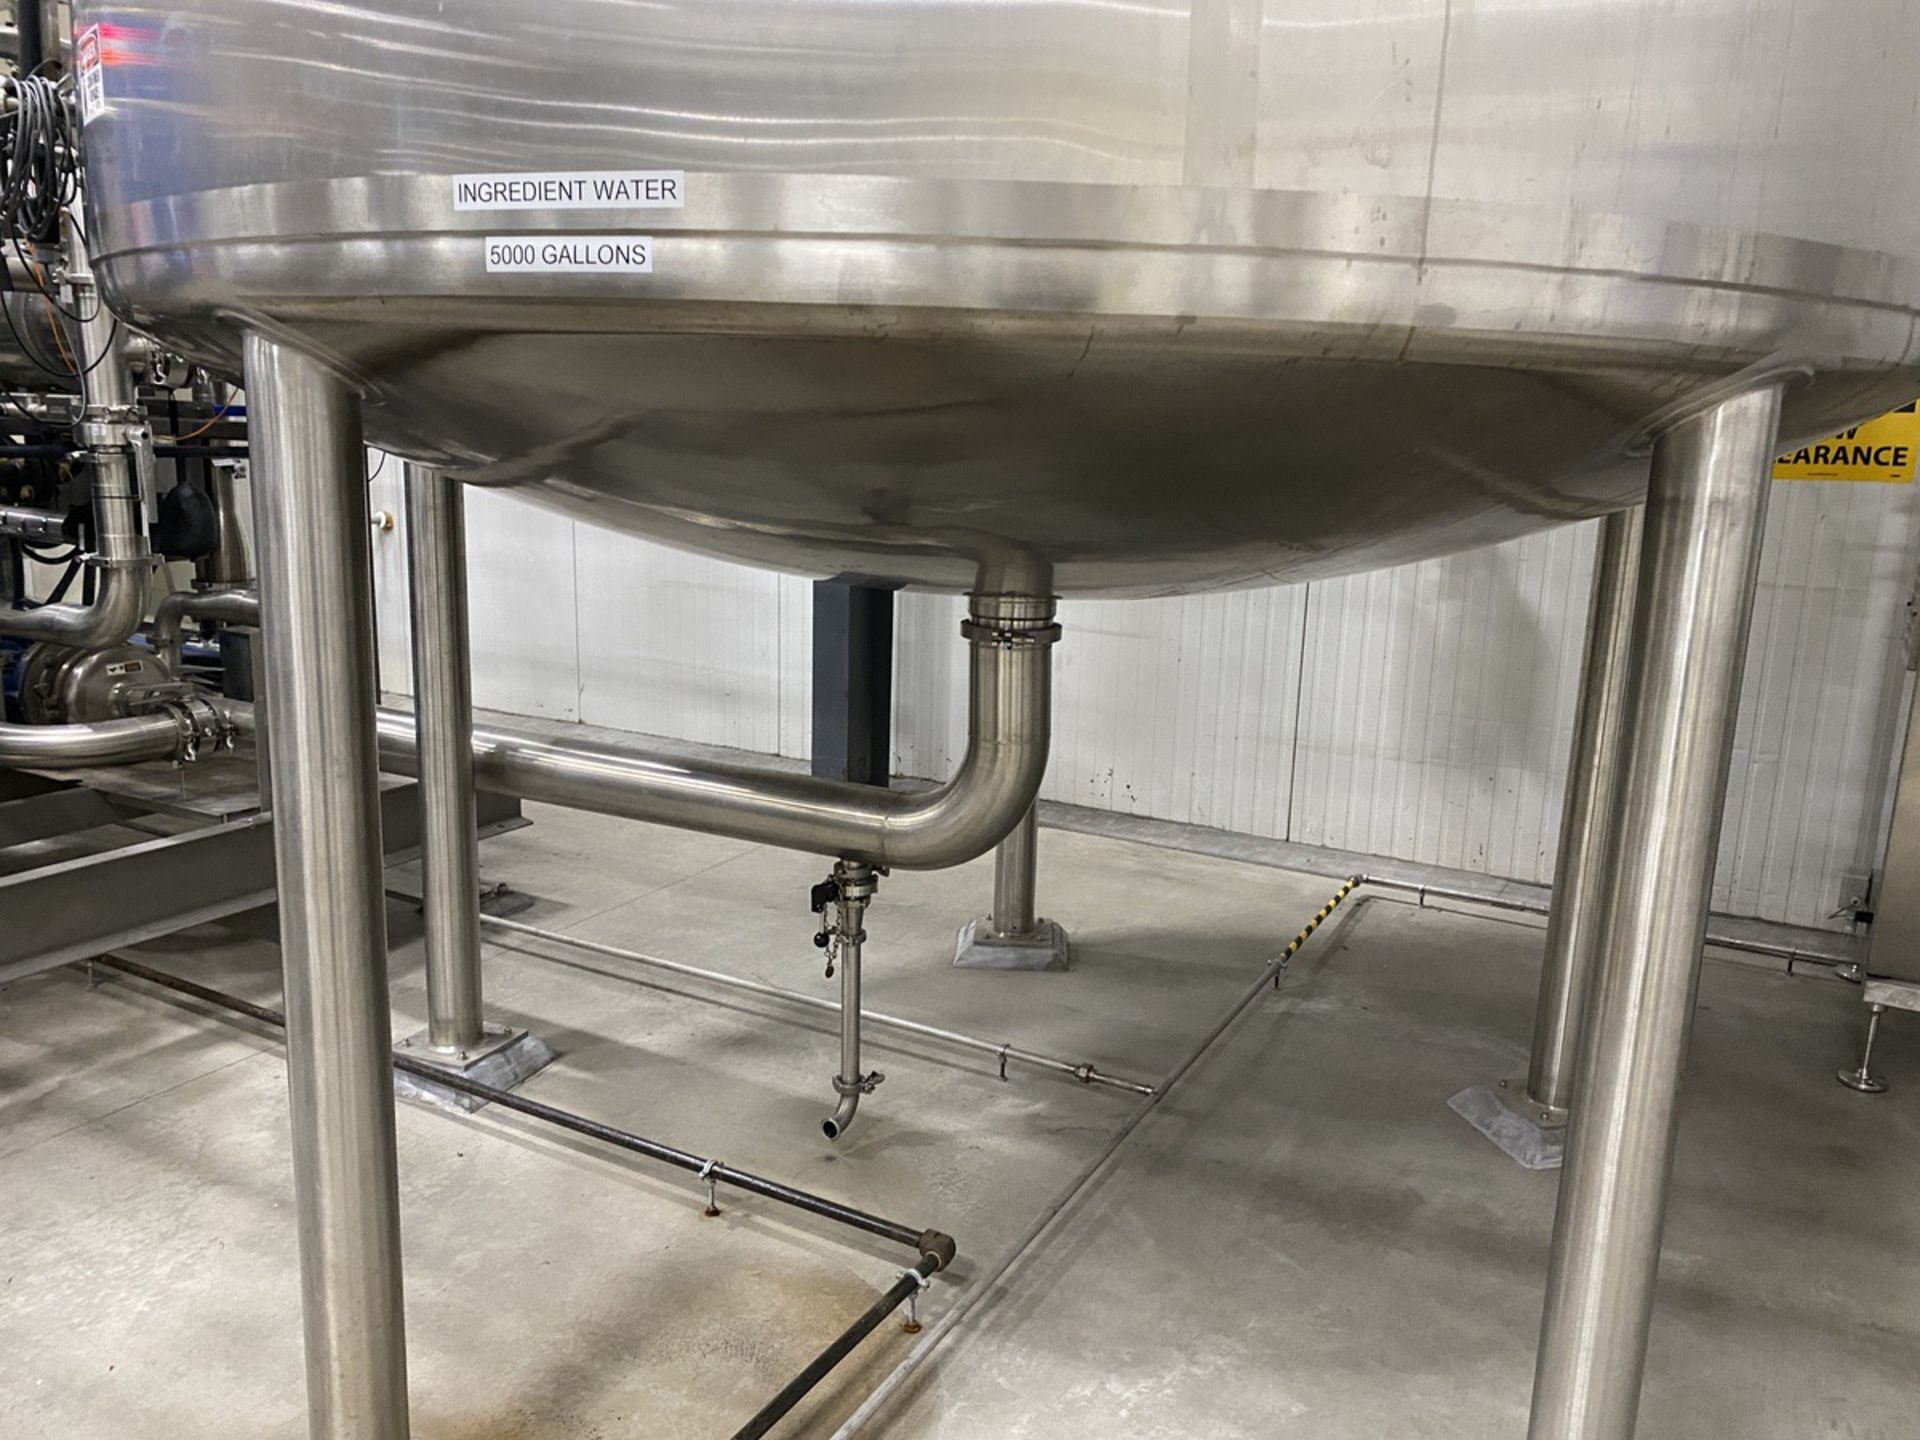 5,000 Gallon Stainless Steel (316L) Ingredient Water Tank on Legs | Rig Fee: $3500 - Image 6 of 6